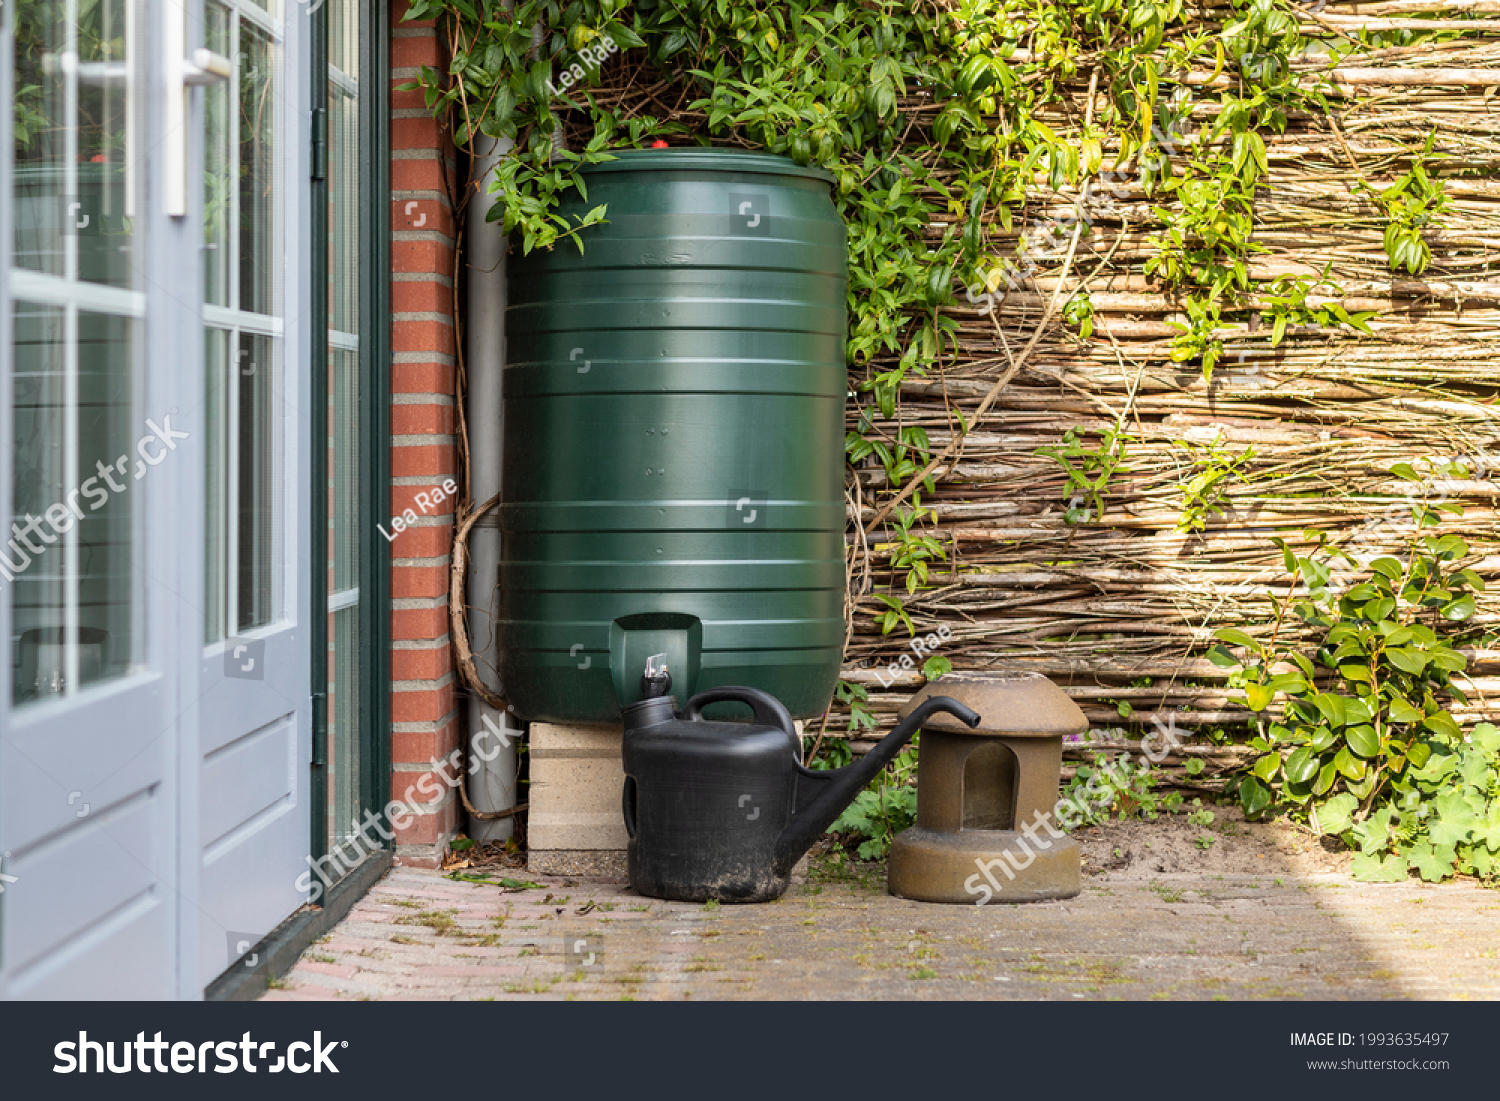 A green rain barrel to collect rainwater and reusing it to water the plants and flowers in a backyard with a wattle fence made of willow branches on a sunny day #1993635497